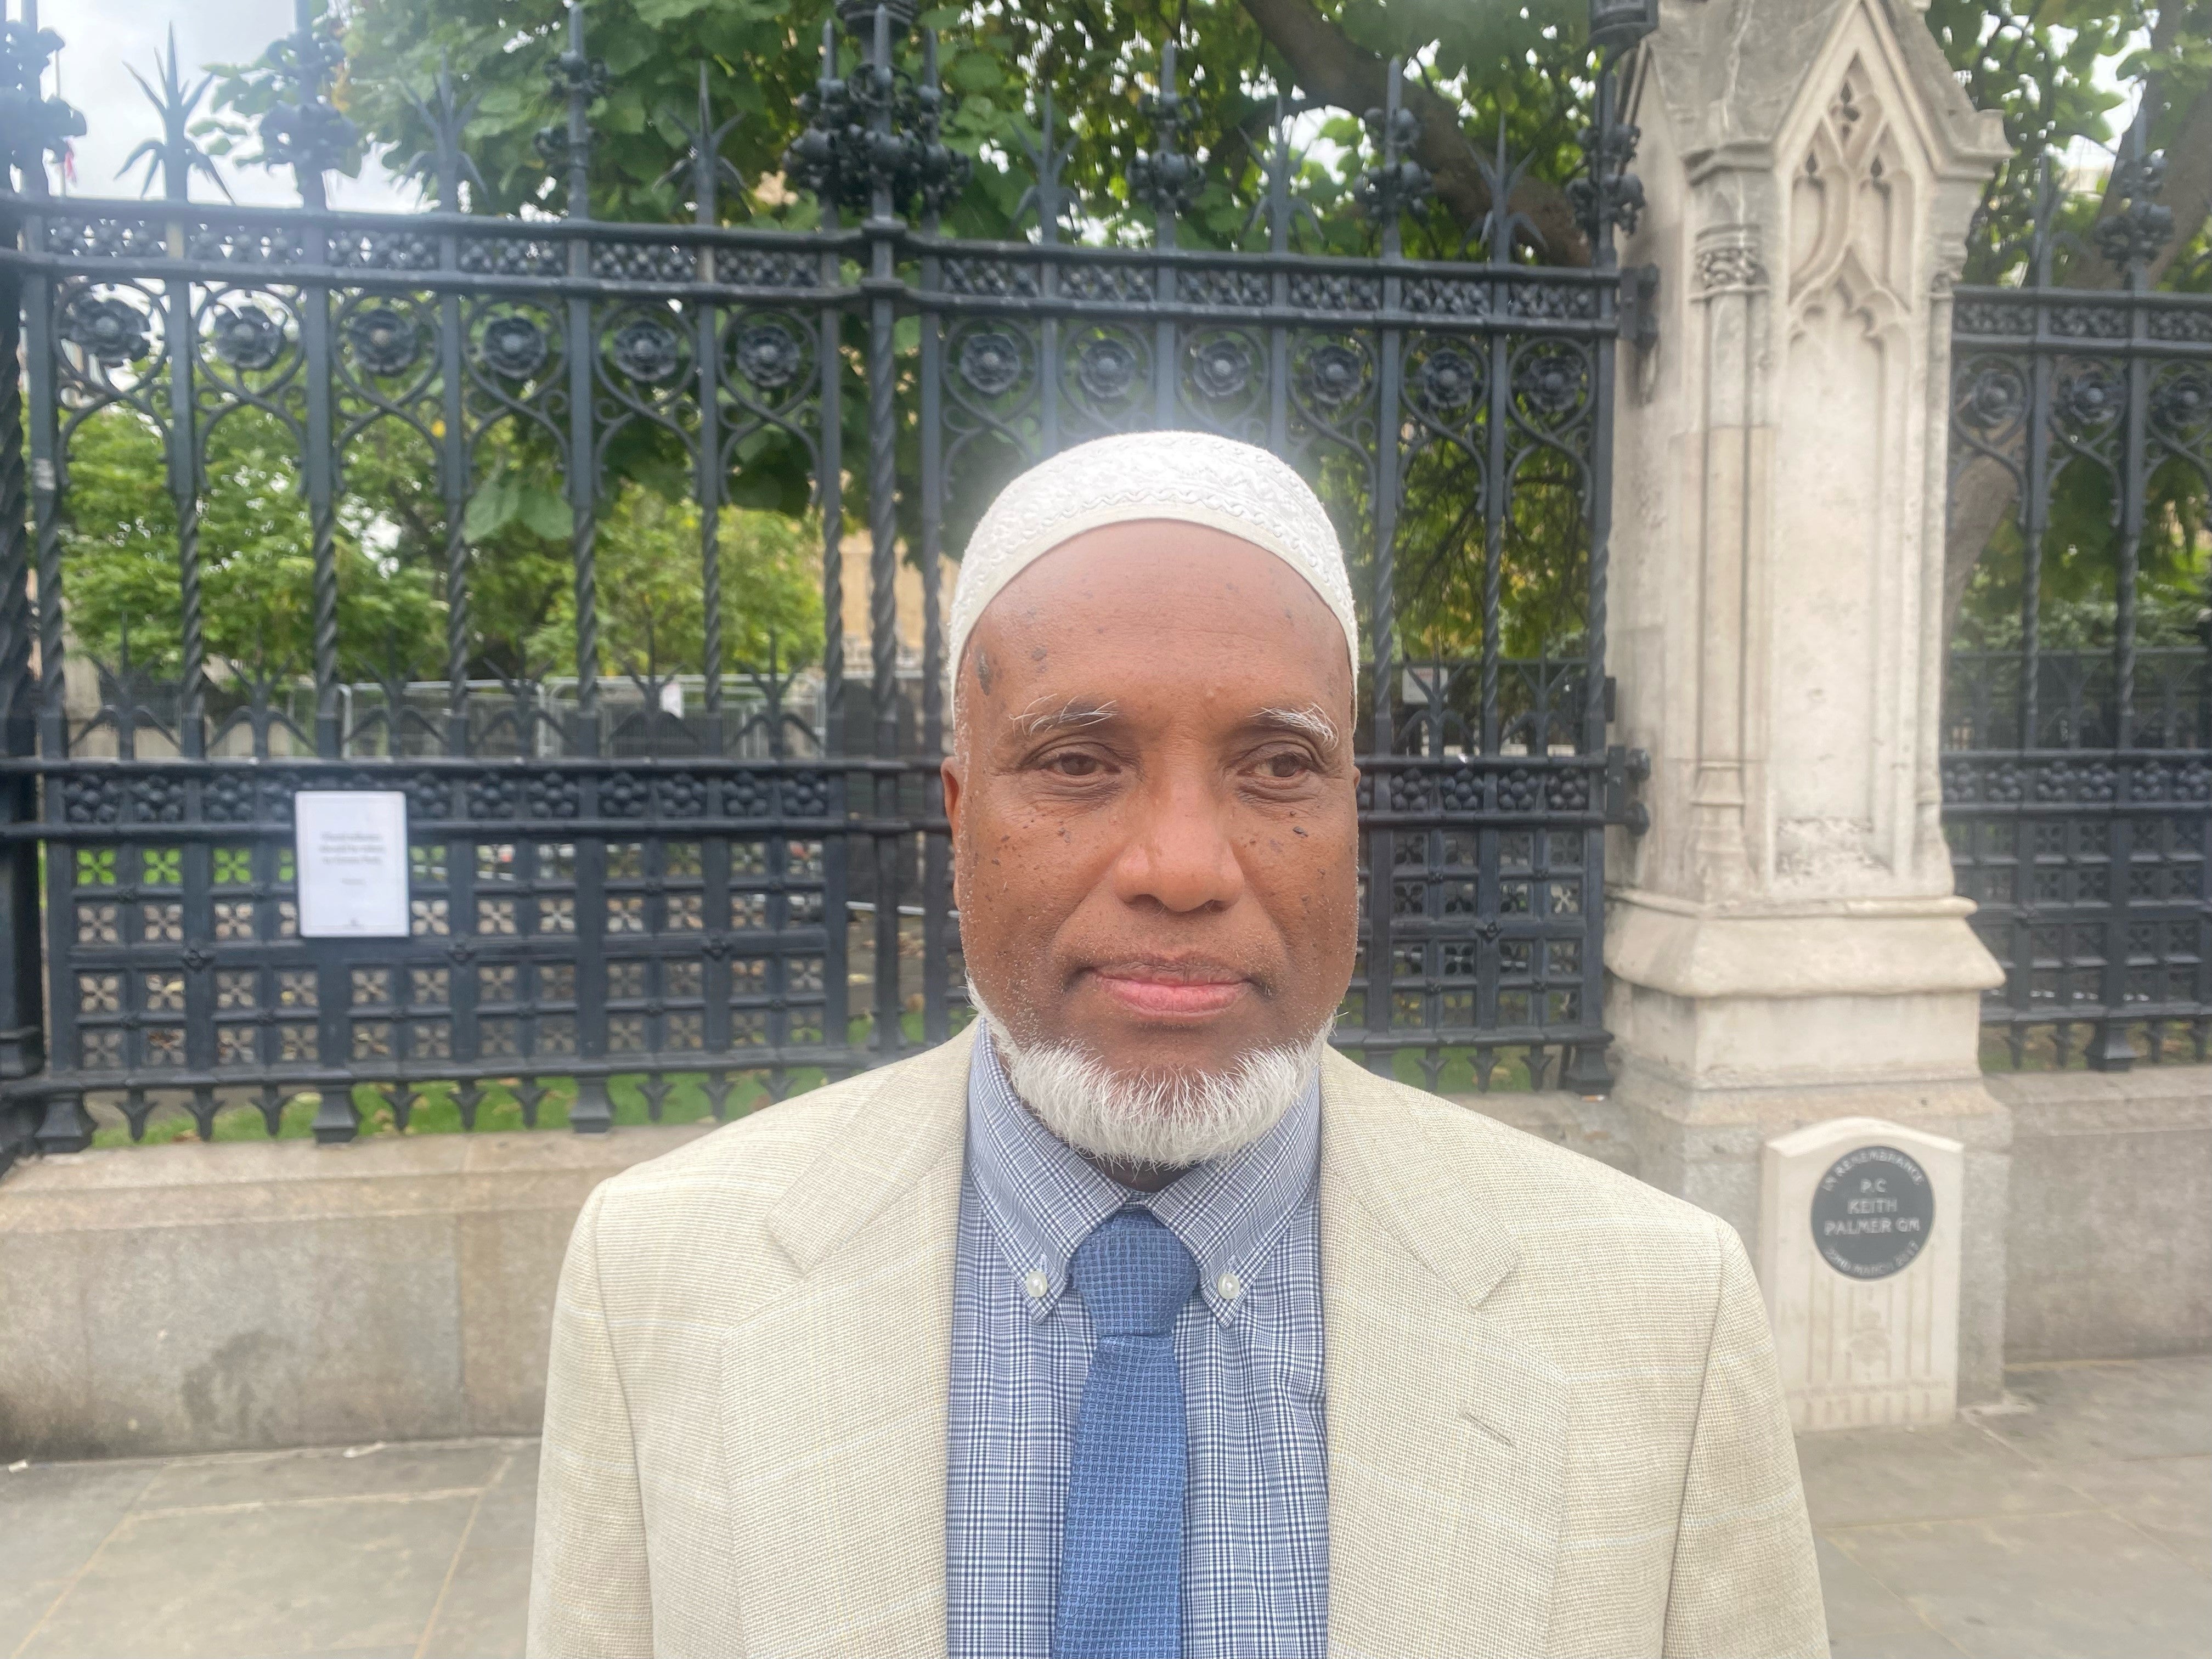 Jamal Uddin, 59, restaurant owner, after paying respects at Westminster Hall (Nina Lloyd/PA)